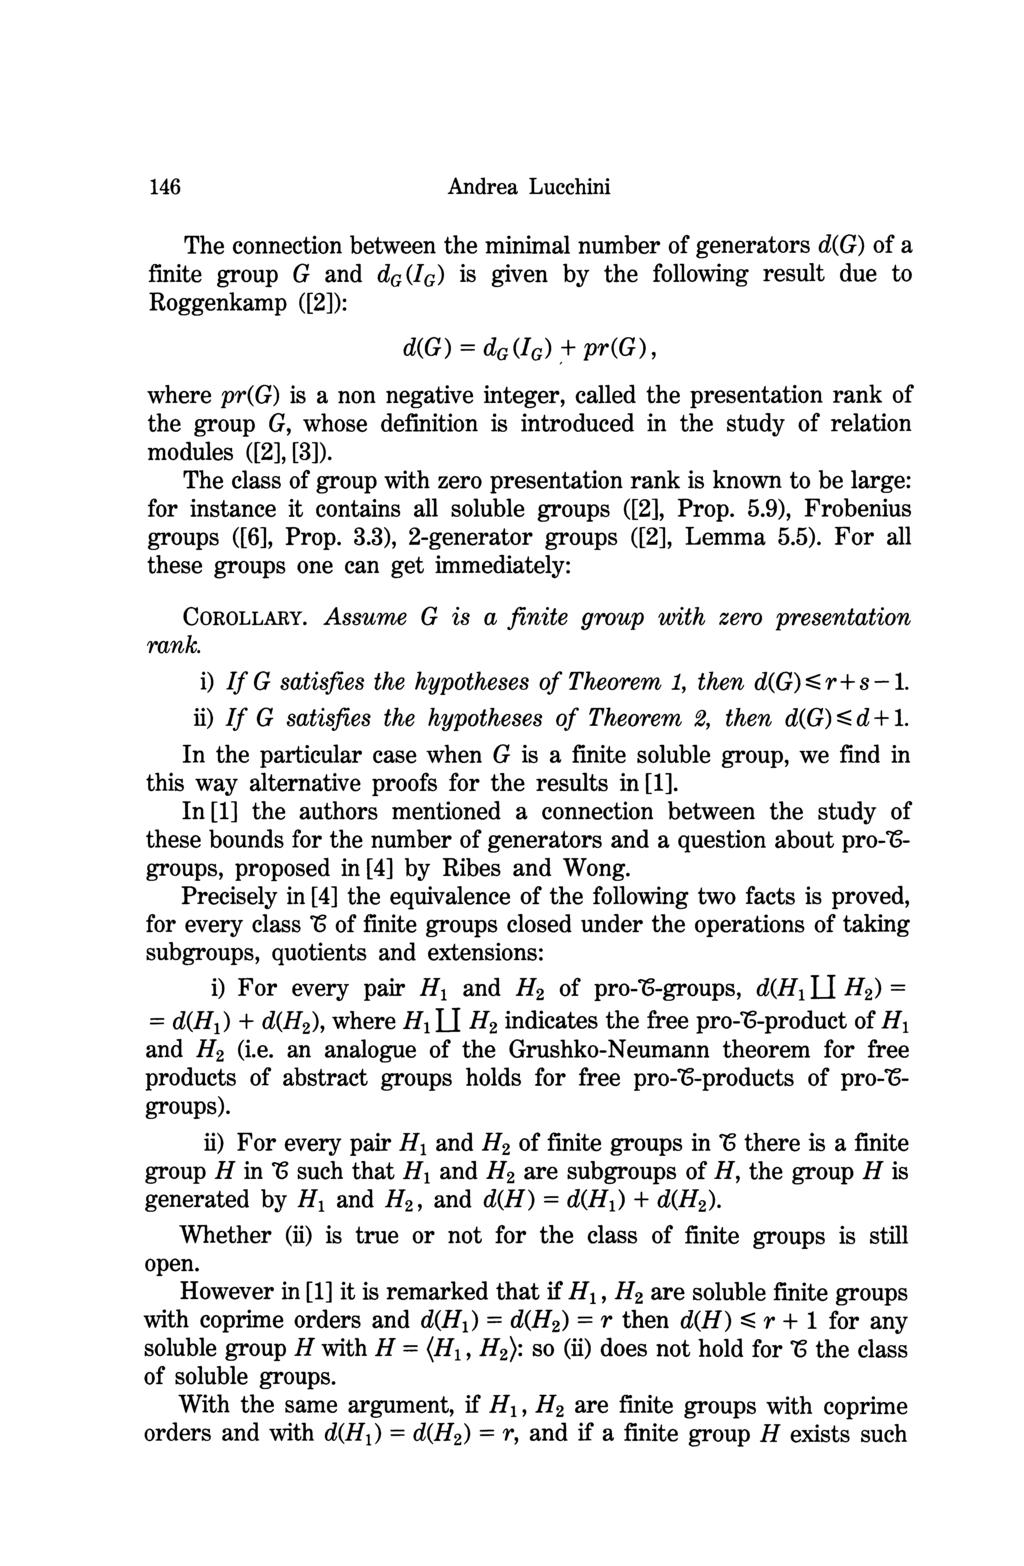 146 The connection between the minimal number of generators d(g) of a finite group G and is given by the following result due to Roggenkamp ([2]): where pr(g) is a non negative integer, called the